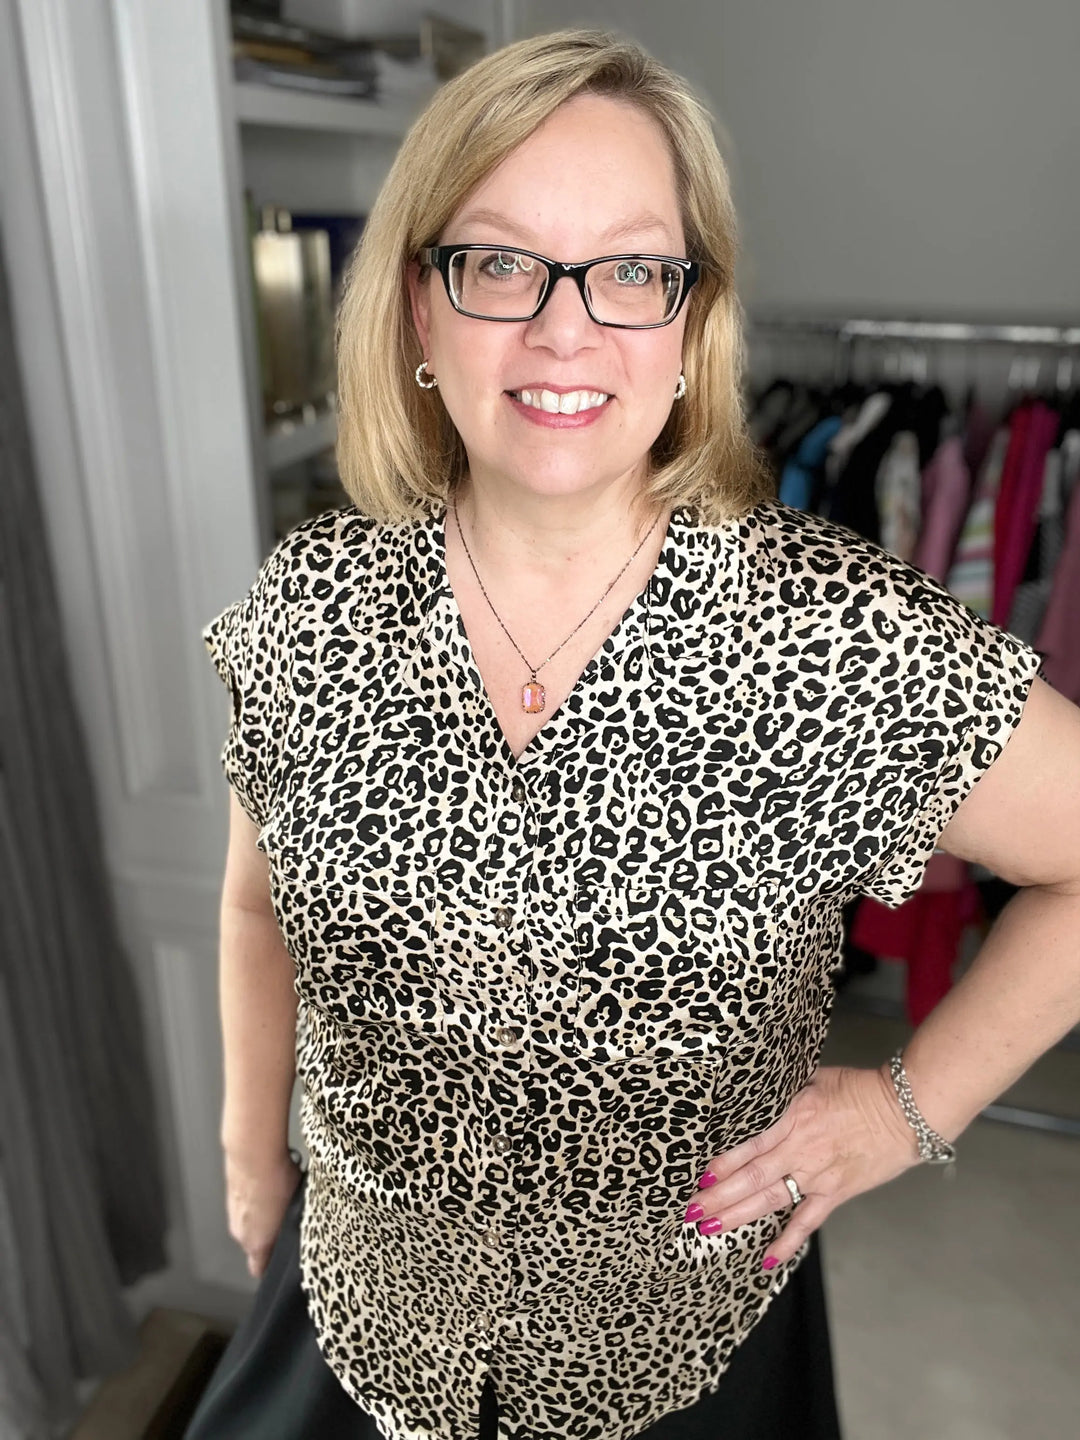 Short-Sleeve Animal Print Blouse Styled by Steph